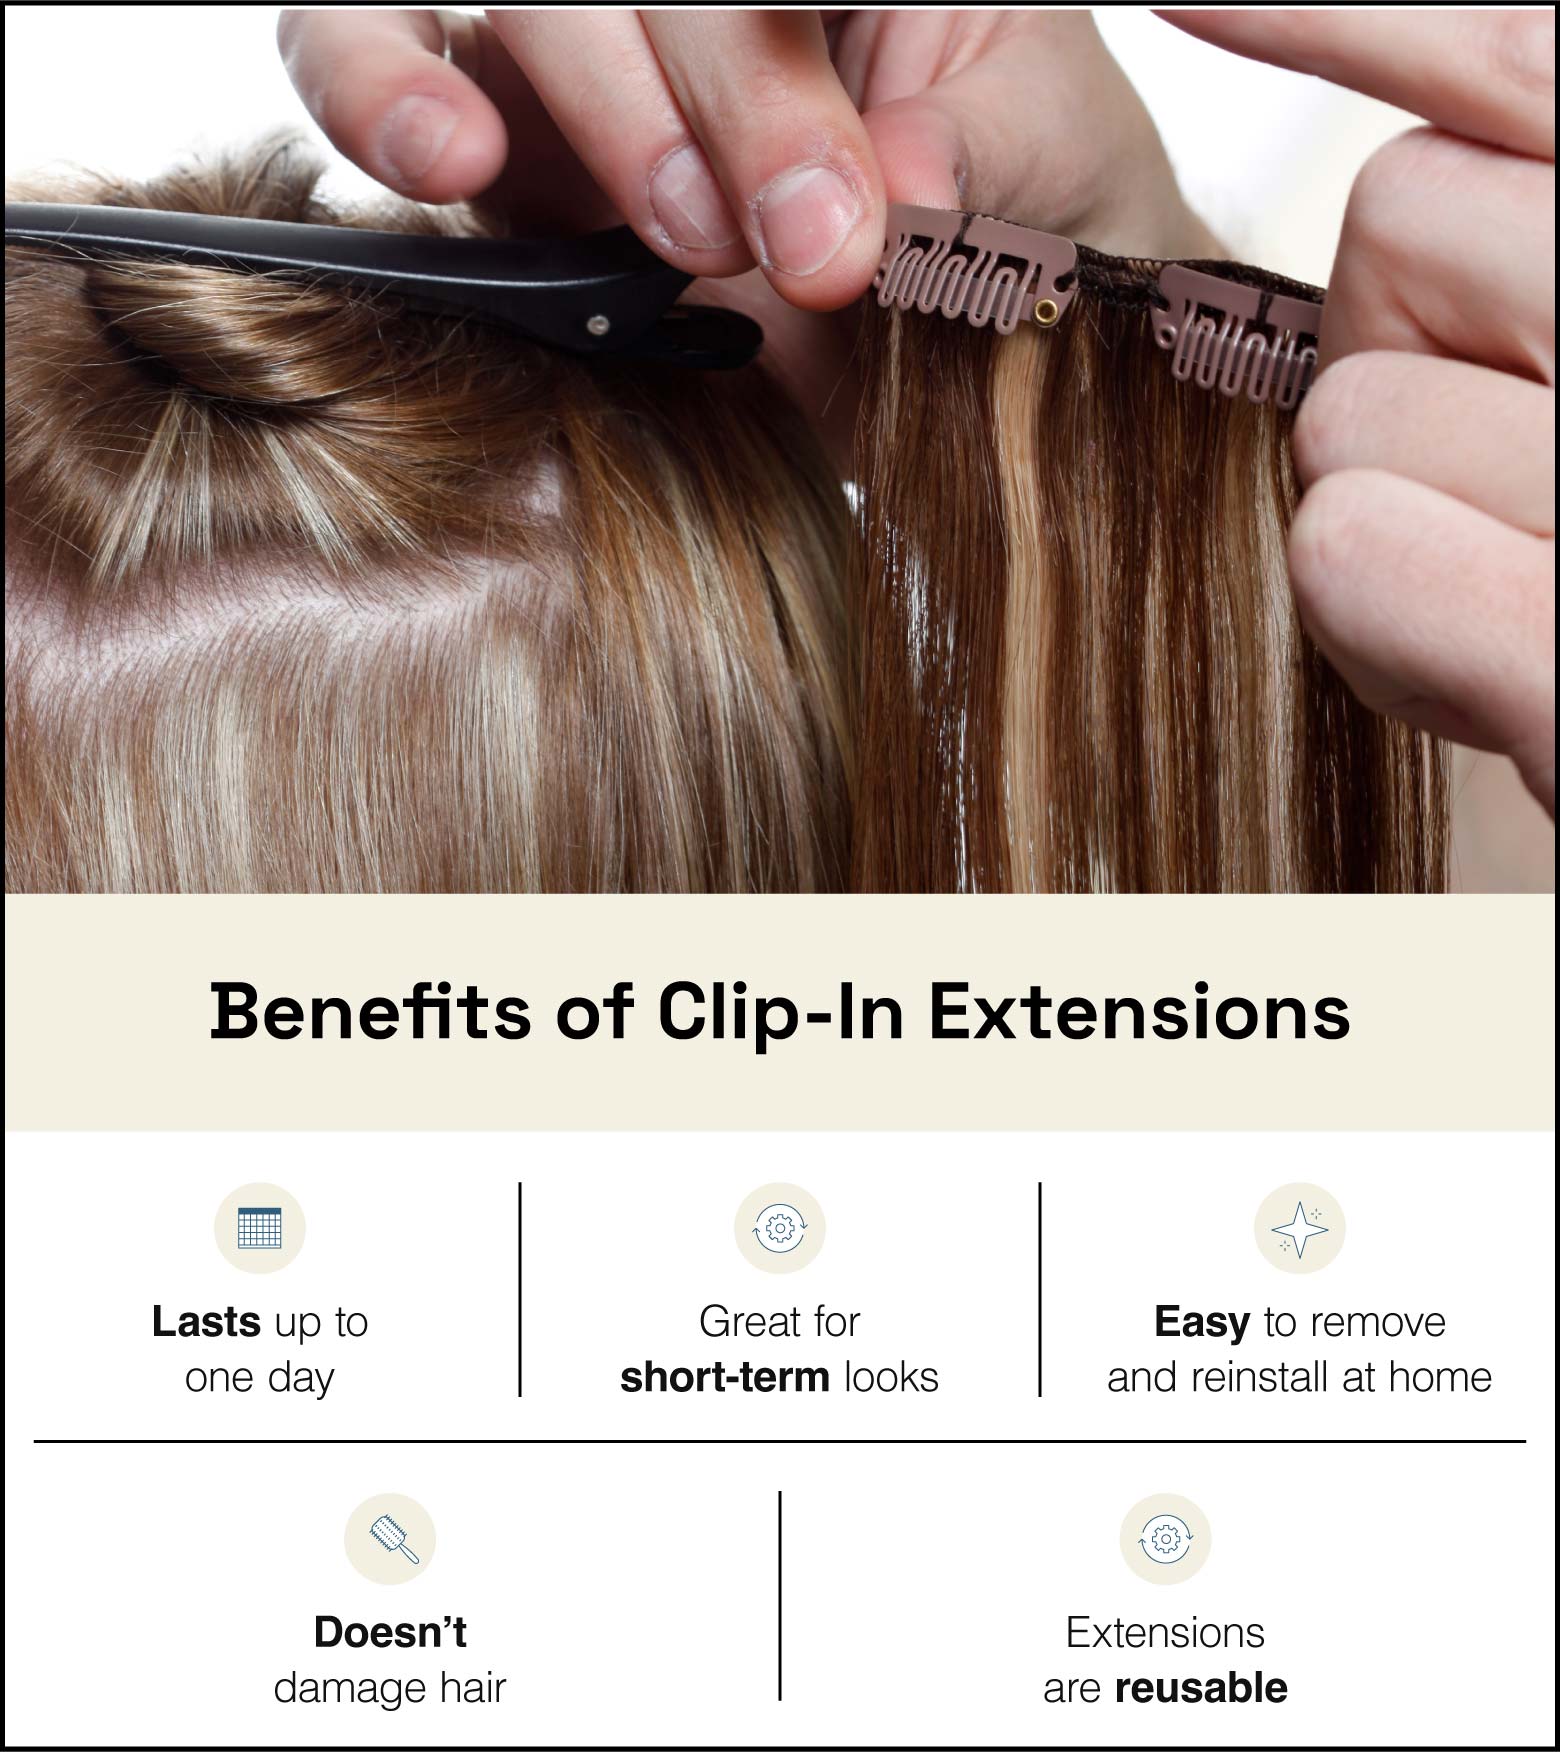 Example image of stylist installing clip-in extensions after dyeing them to match client’s hair with text below describing clip-in benefits.